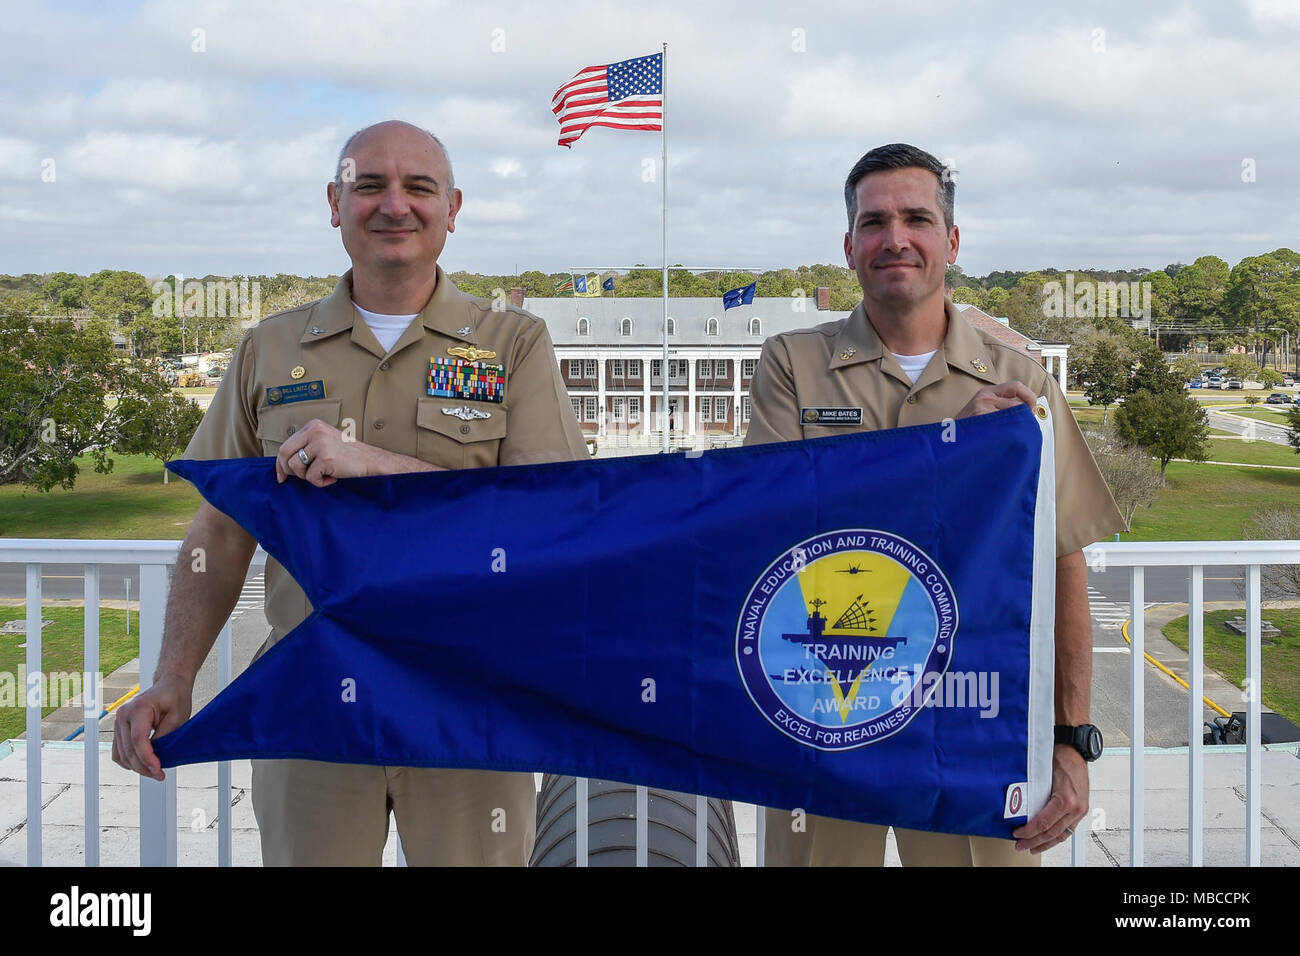 Fla. (Feb. 20, 2018)  Capt. Bill Lintz, commanding officer, Center for Information Warfare Training (CIWT) and CIWT Command Master Chief Mike Bates pose with the 2017 NETC Training Excellence Award blue burgee. CIWT won the overall Training Excellence White 'T' award, all nine functional area awards and is authorized to display the burgee throughout 2018. (U.S. Navy Stock Photo